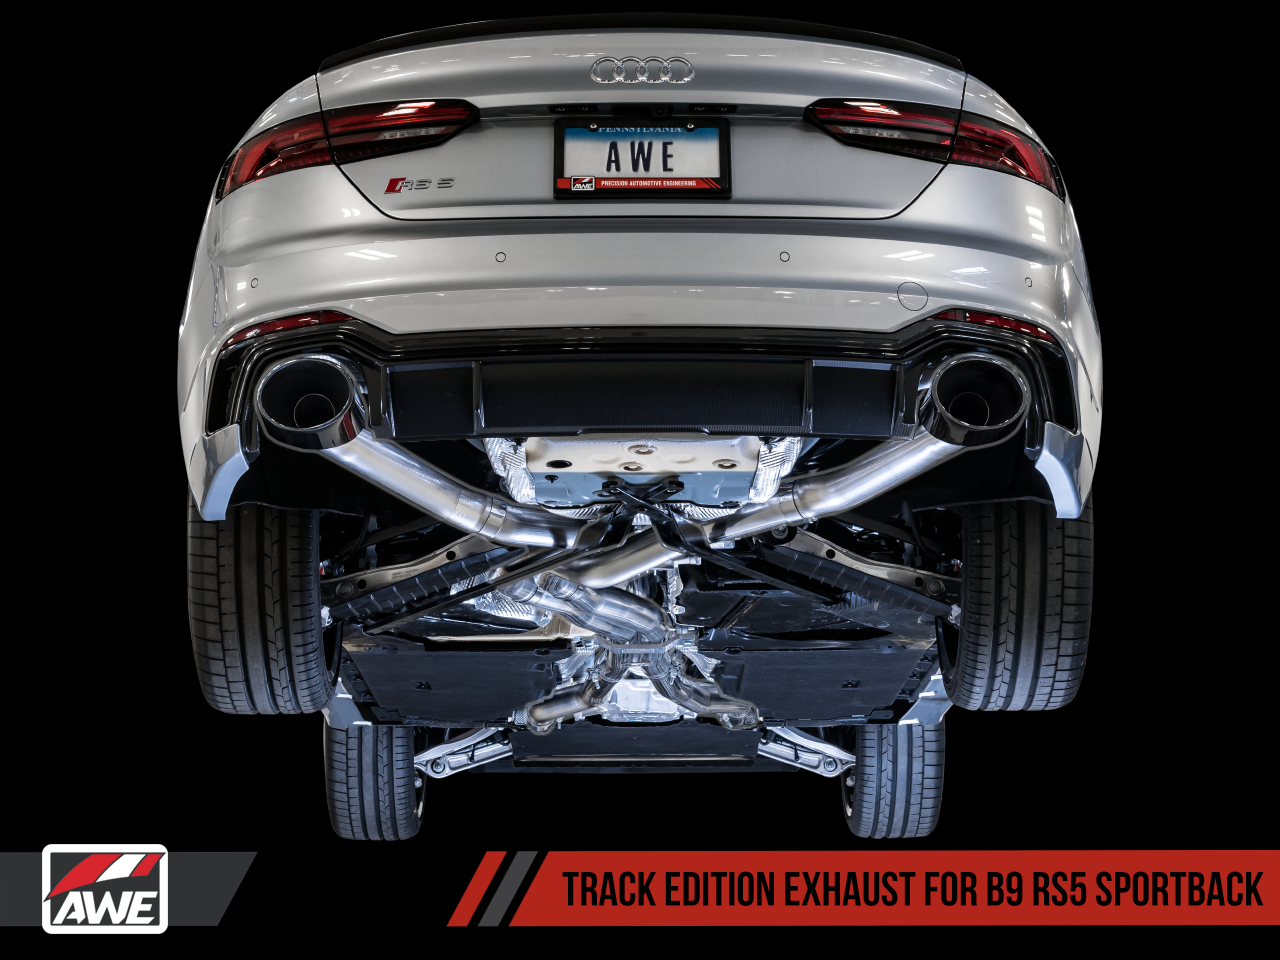 AWE Touring Edition Exhaust for Audi B9 RS 5 Sportback - Resonated for Performance Catalysts - Diamond Black RS-style Tips - Motorsports LA